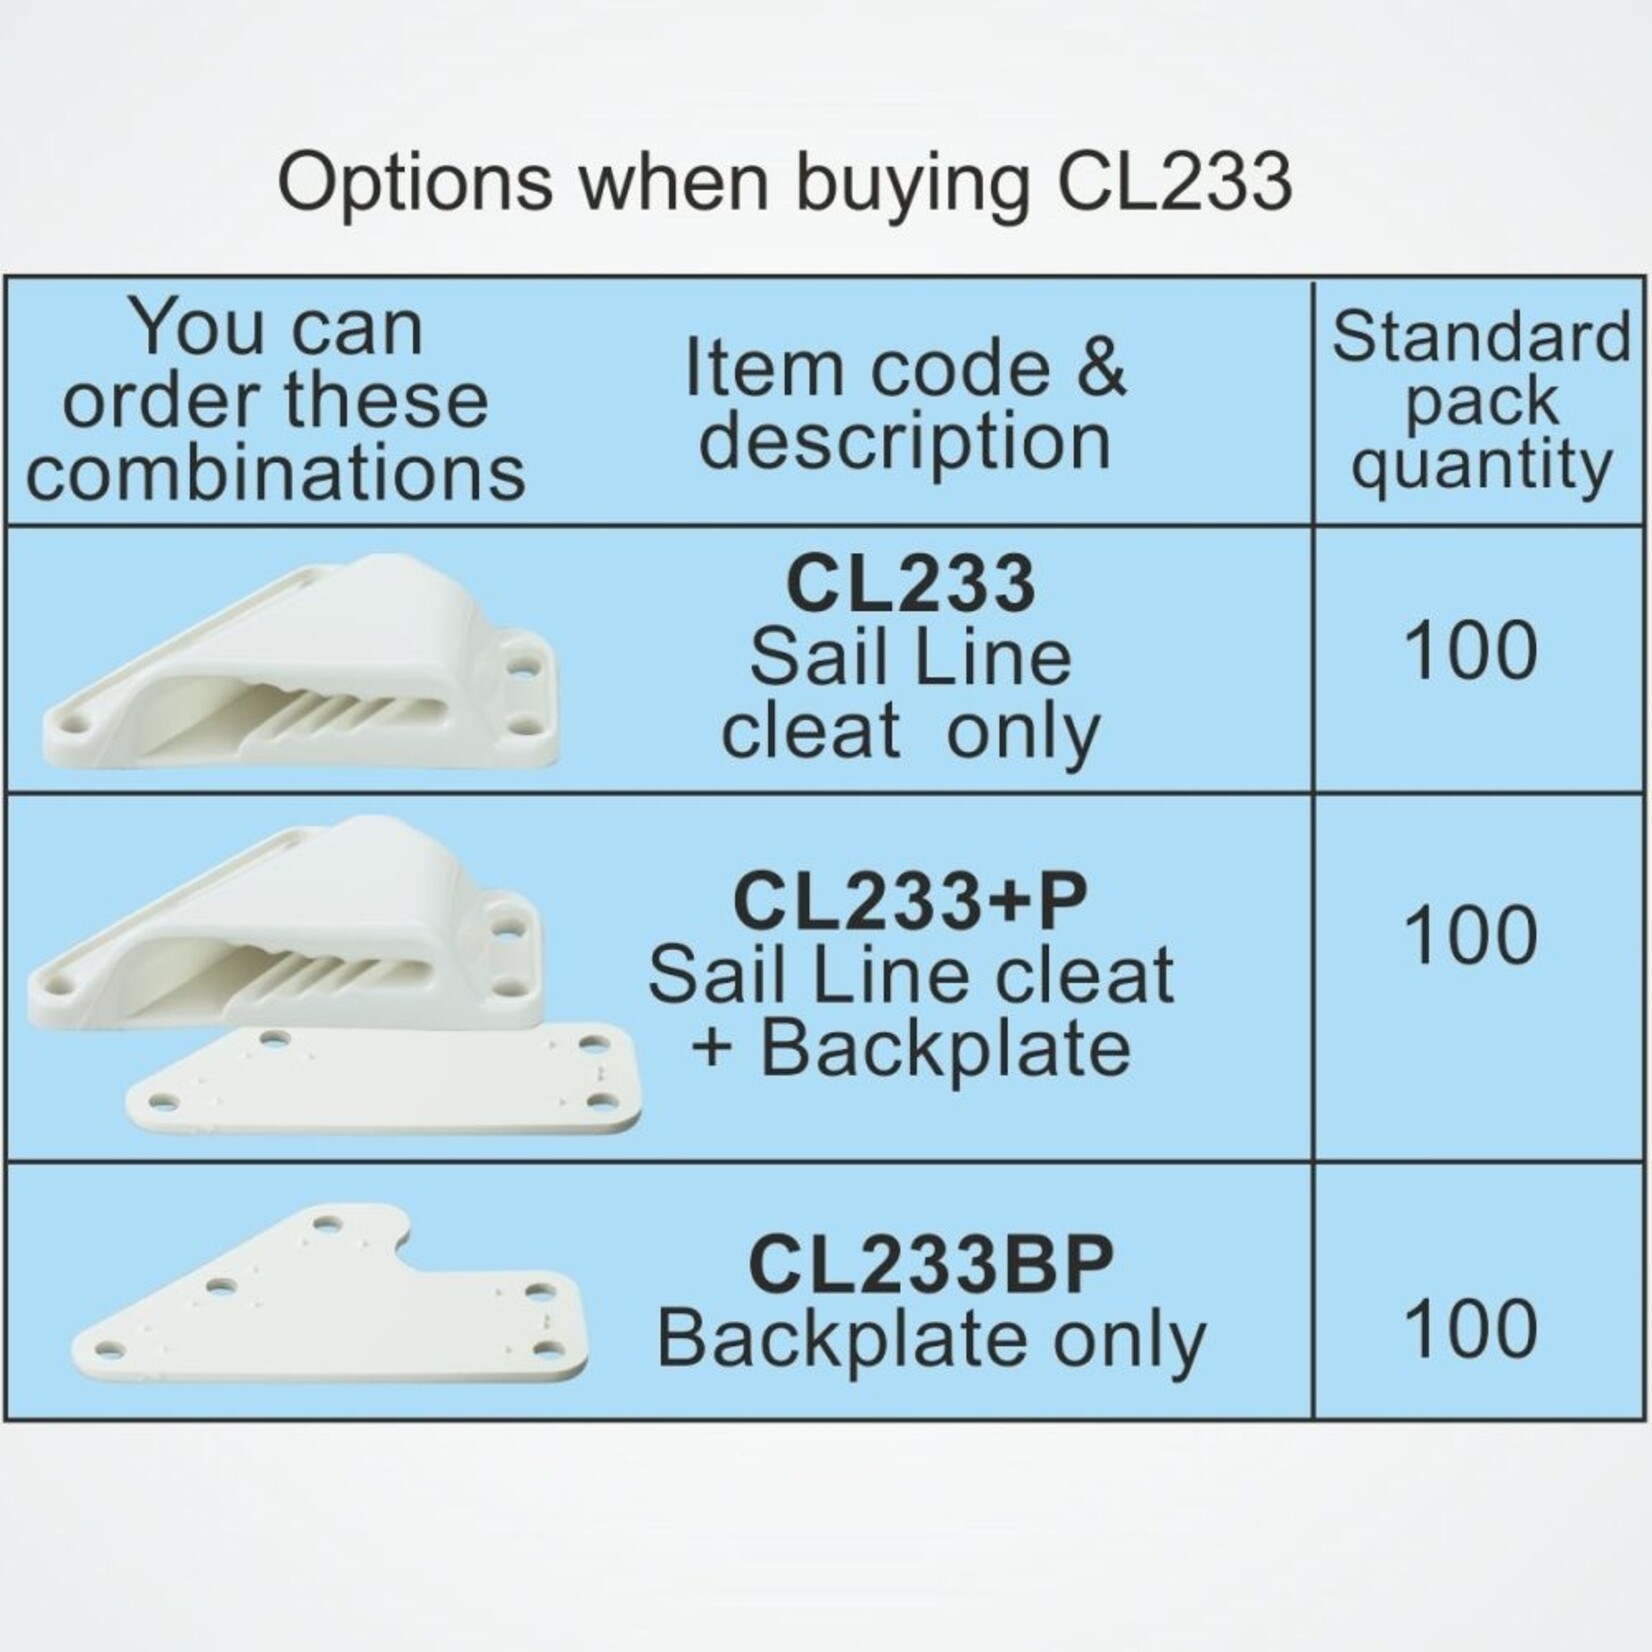 Clamcleat Backplate for CL233 - Loose